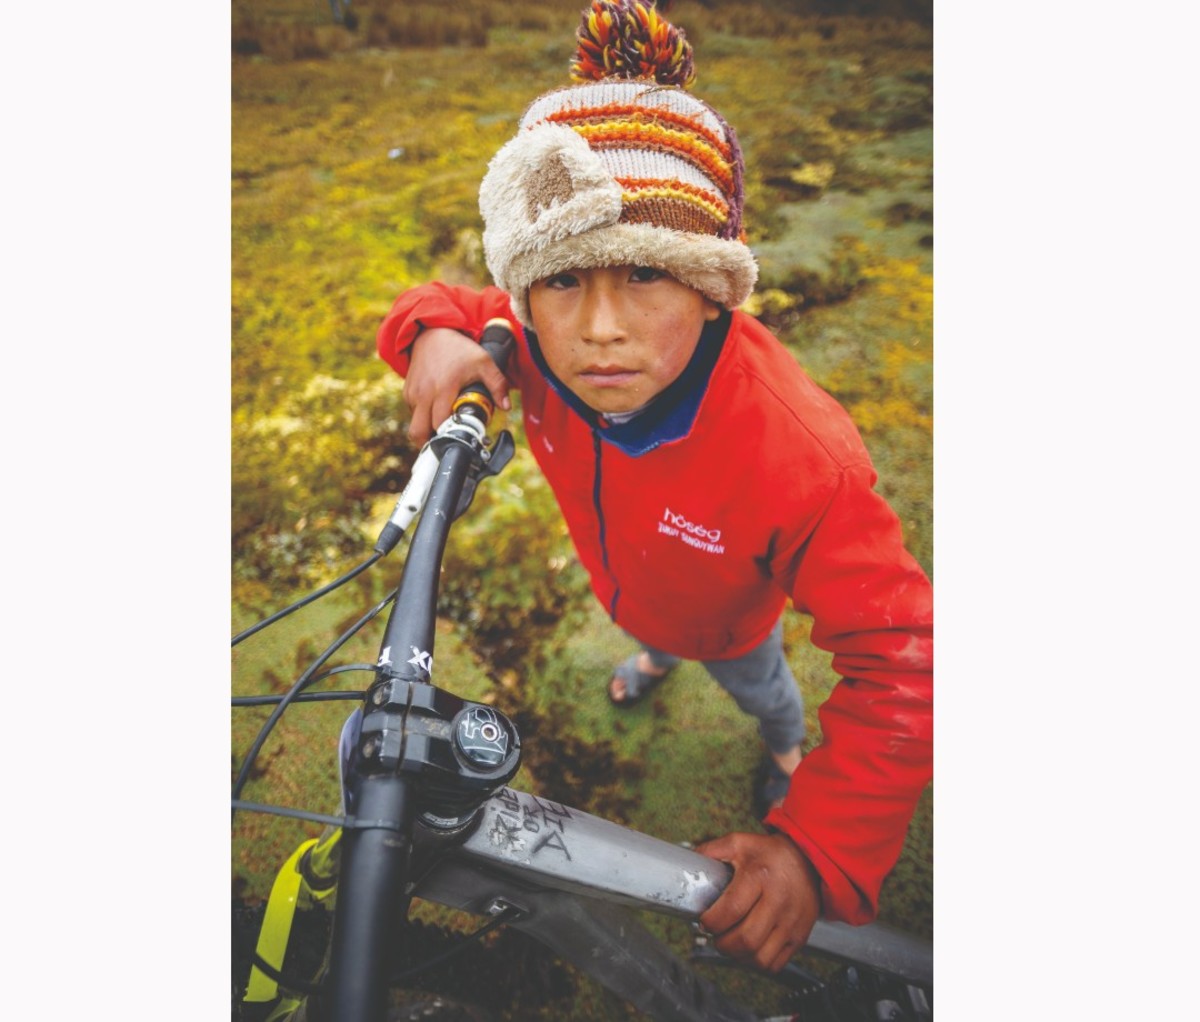 Small Peruvian child in red sweater and knit hat